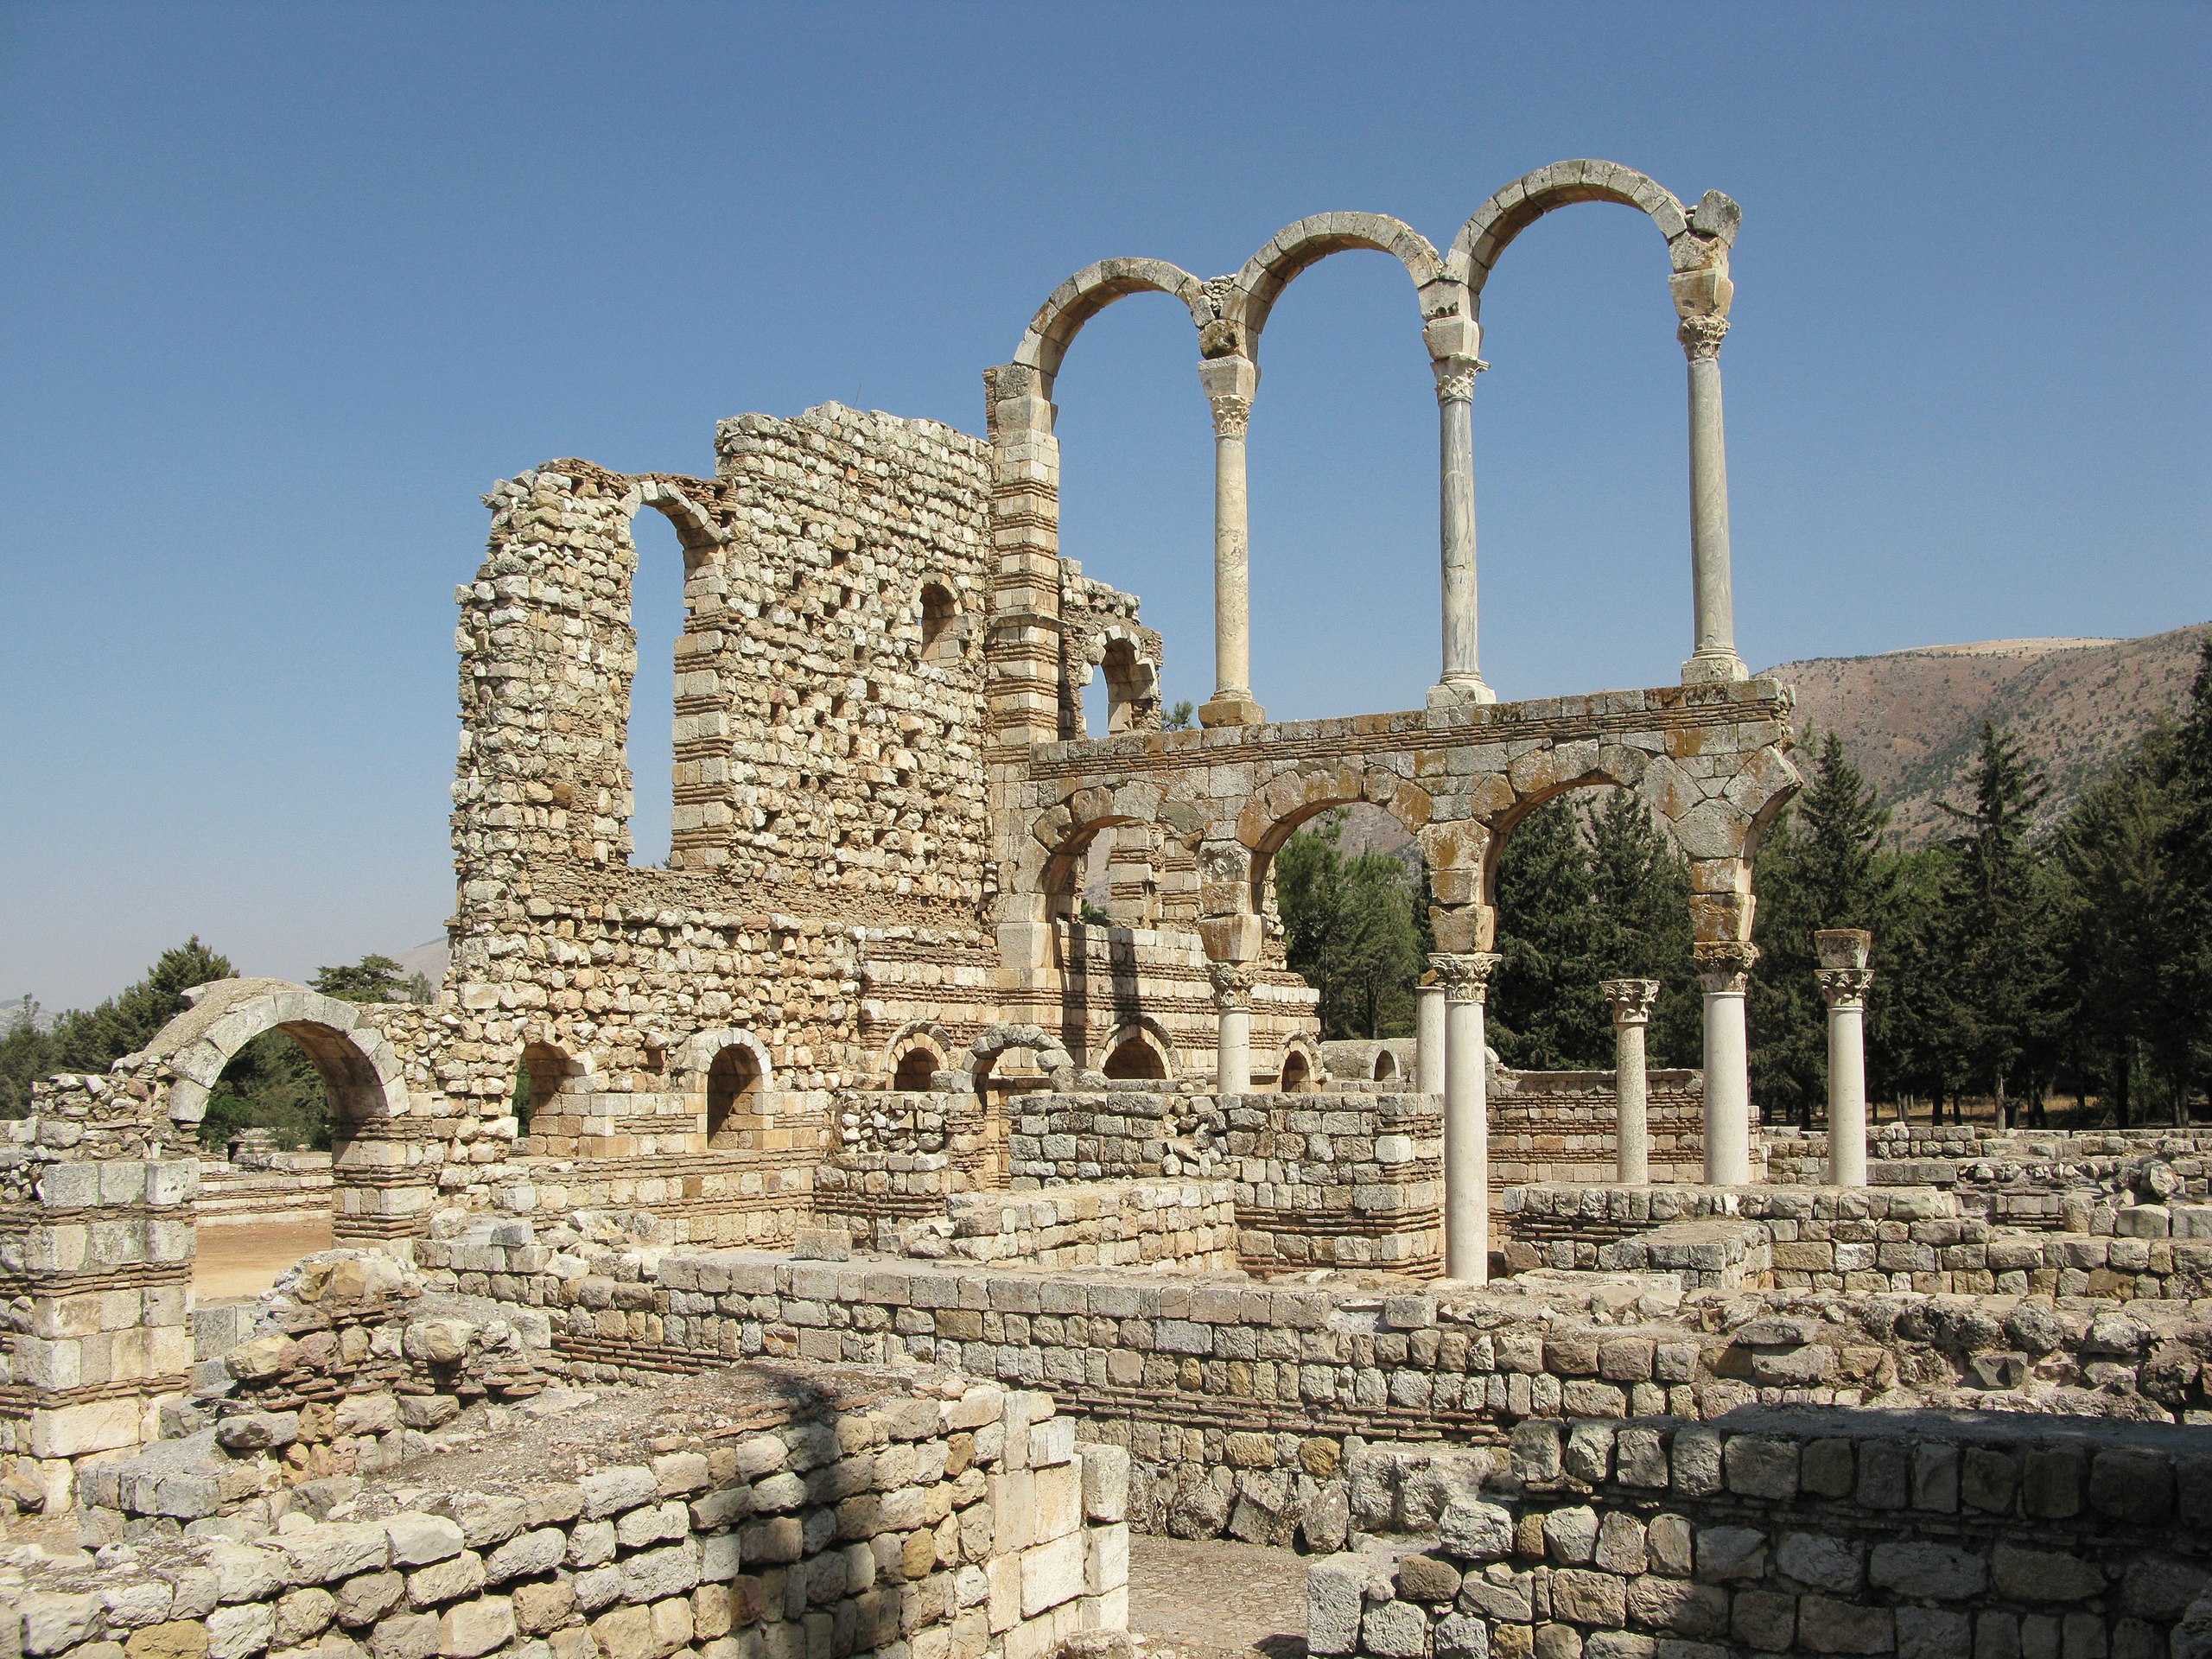 <p>View of the ruins with arcade</p>